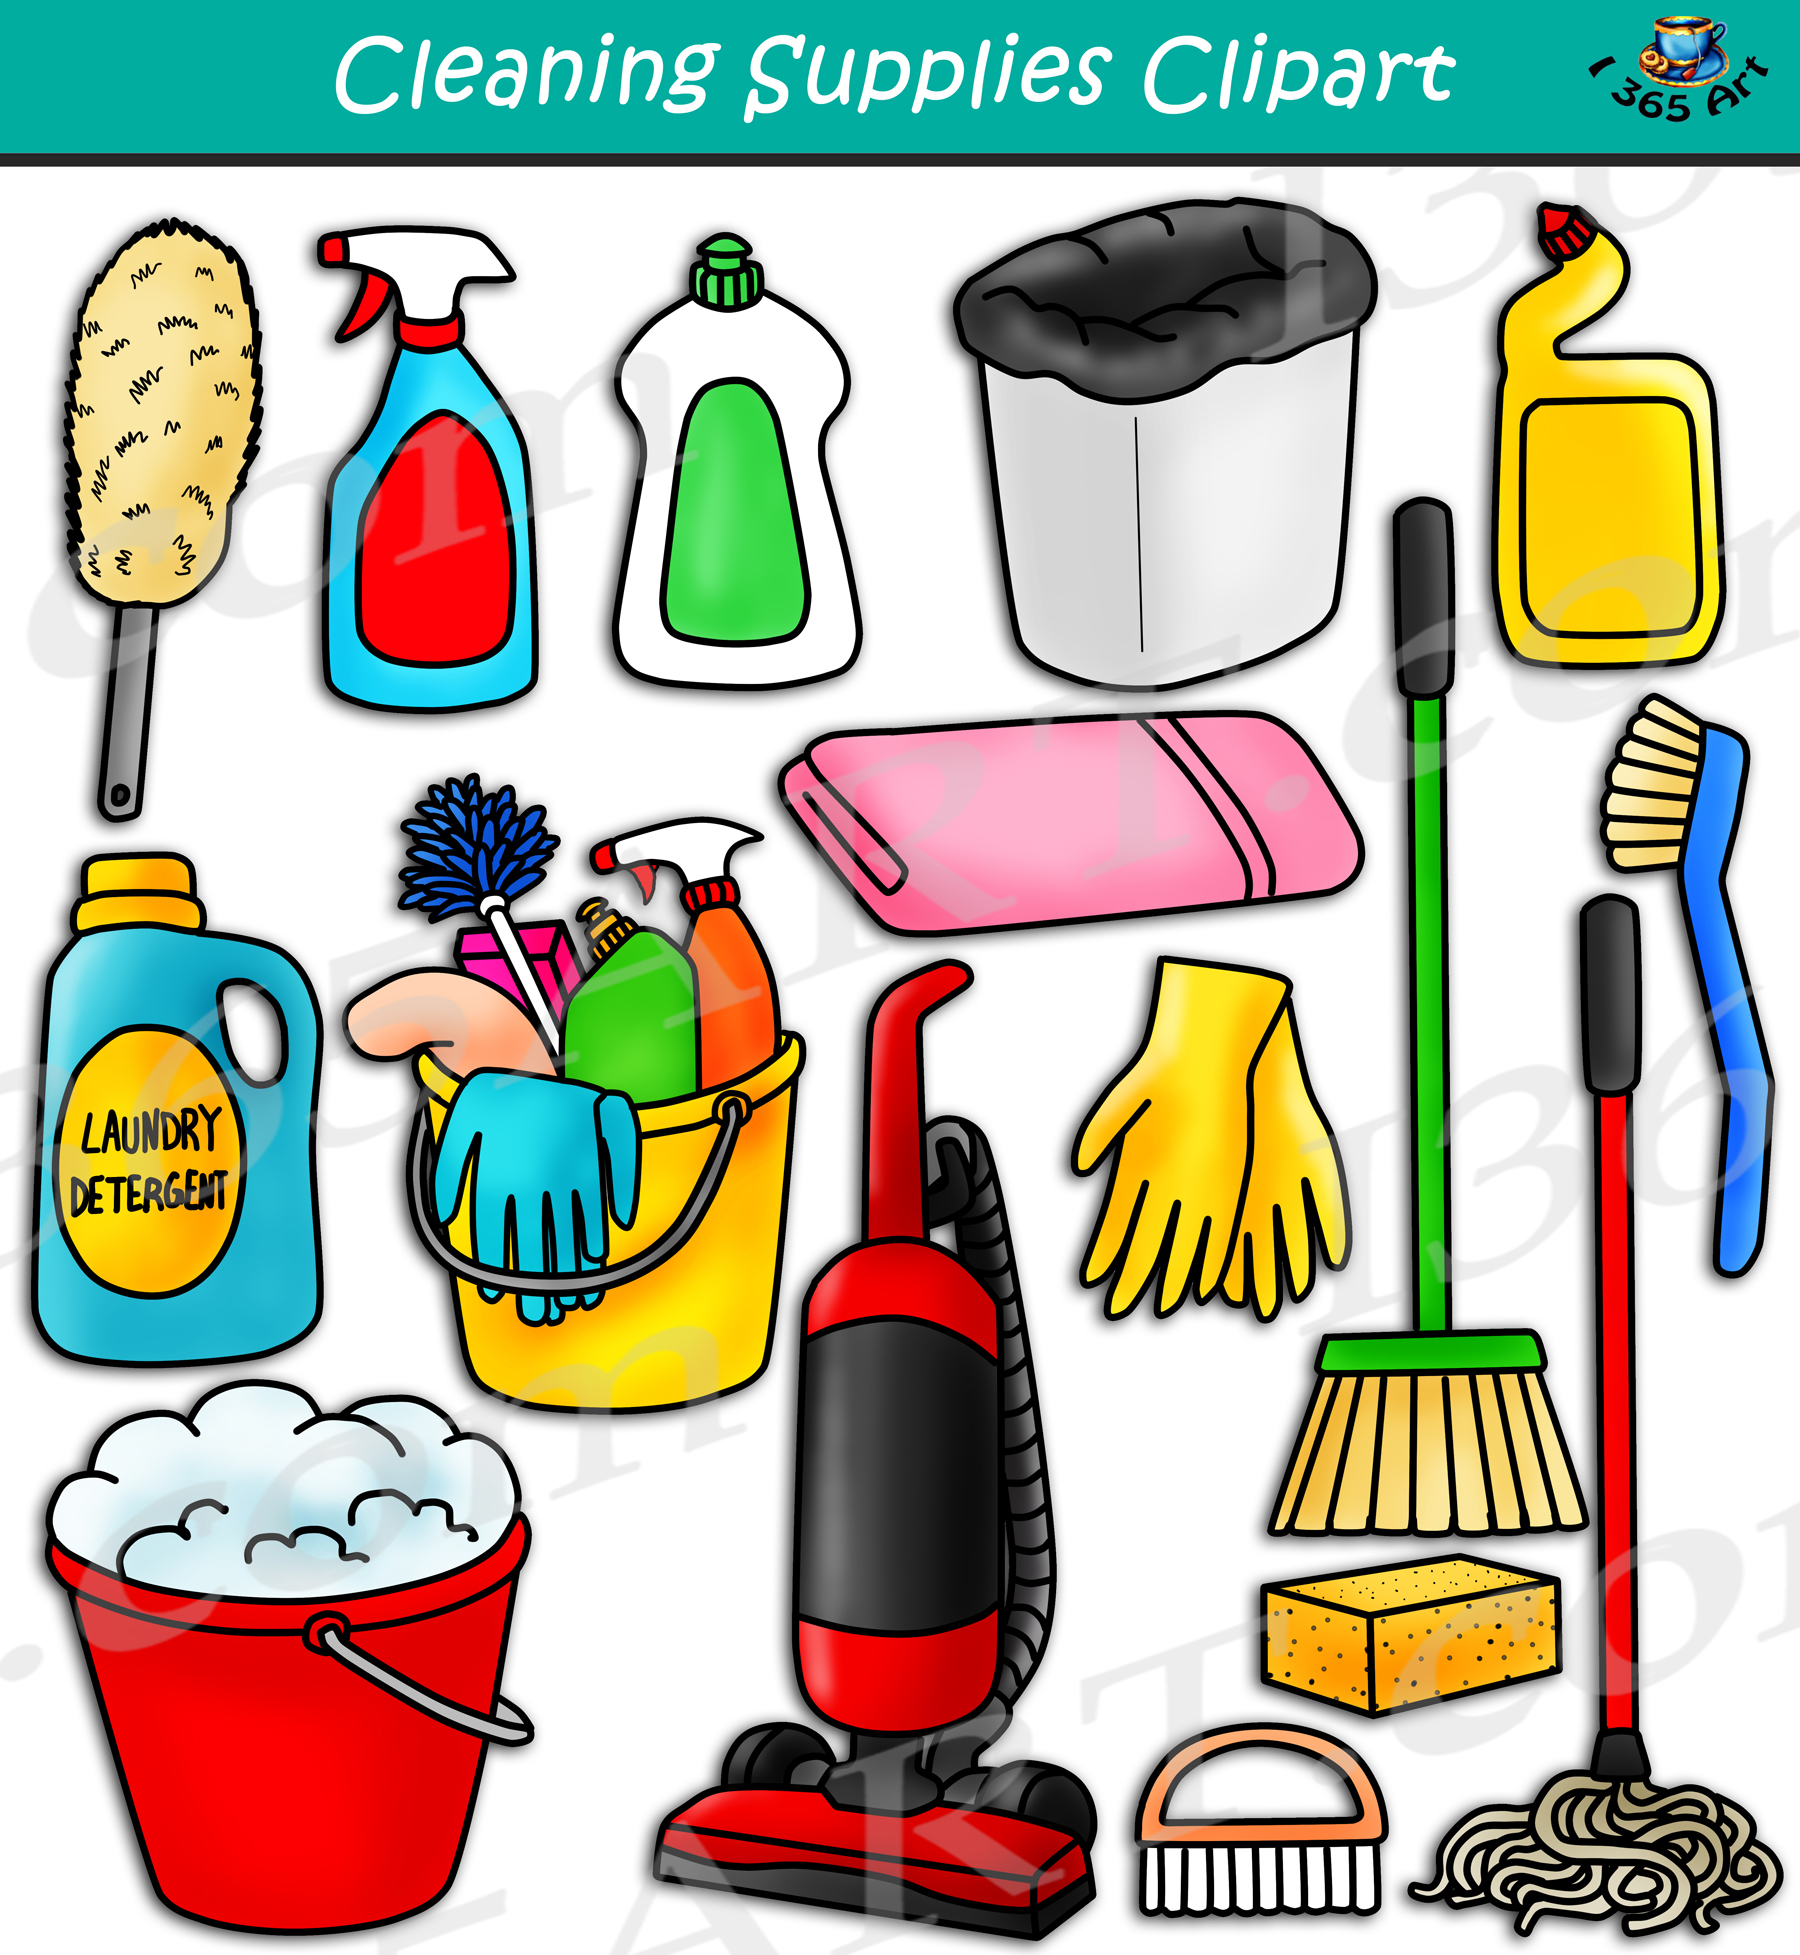 https://clipart4school.com/wp-content/uploads/2022/05/cleaning-supplies-clipart-preview.jpg